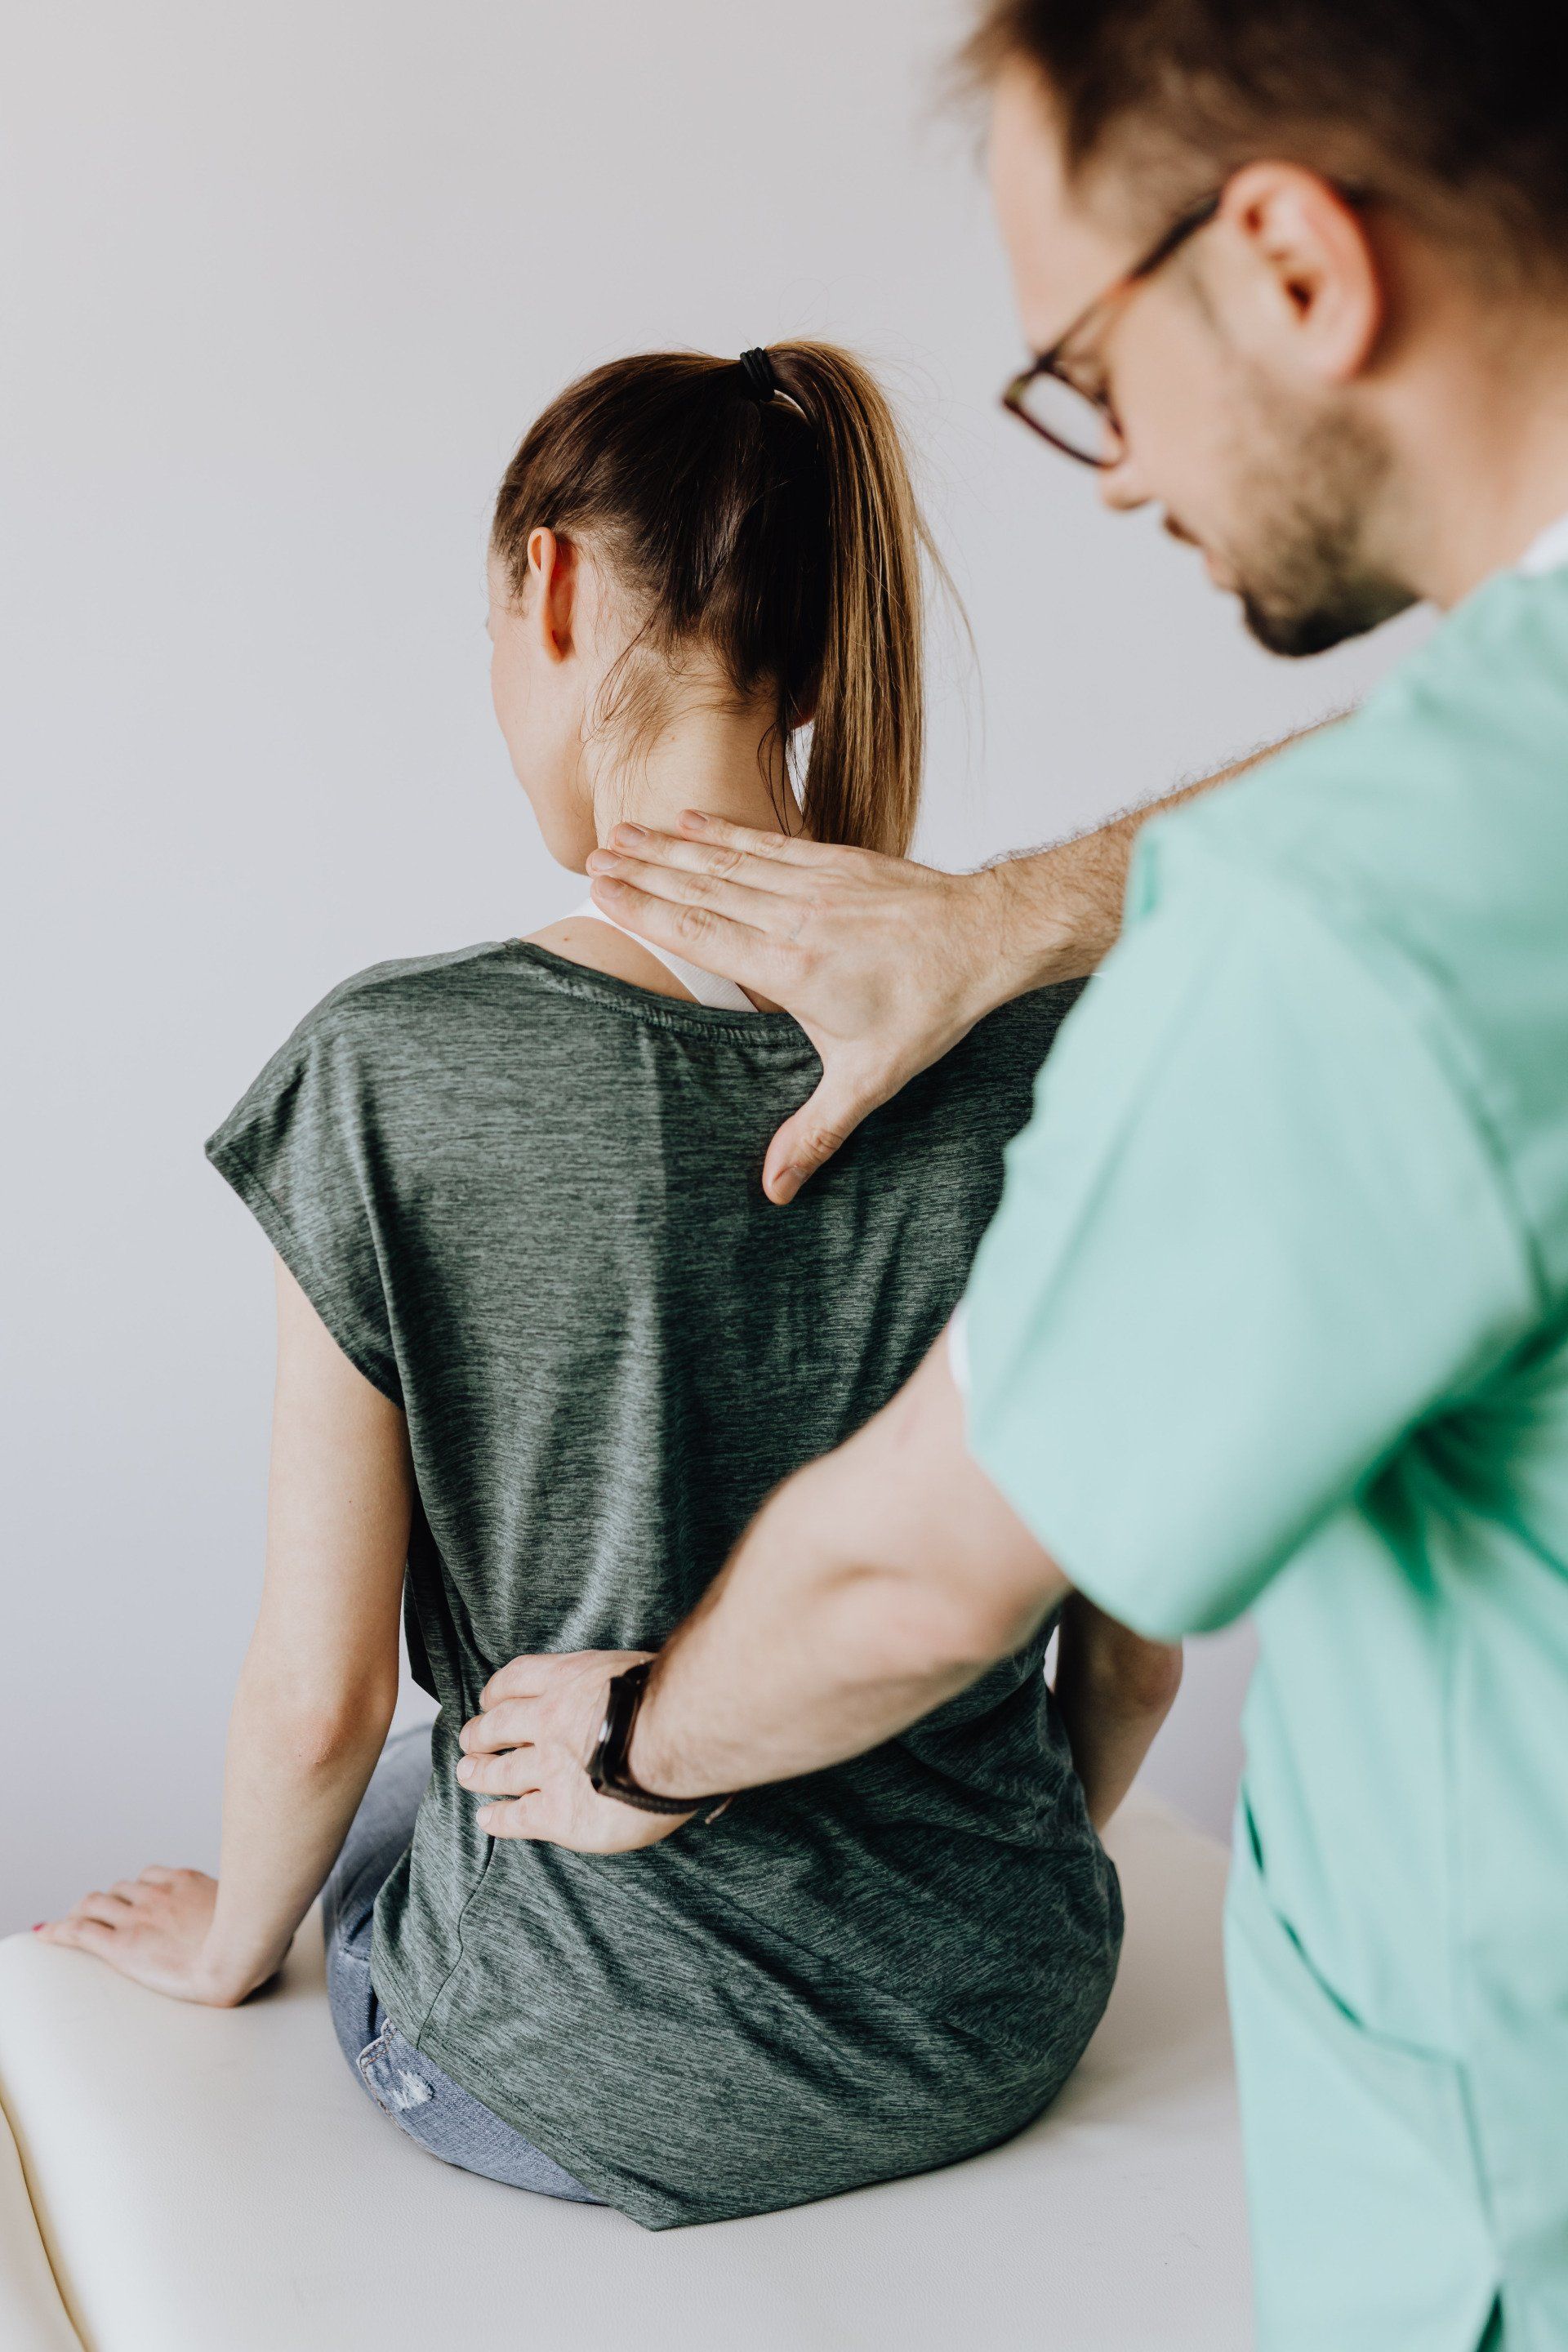 Chiropractor examining young woman's back